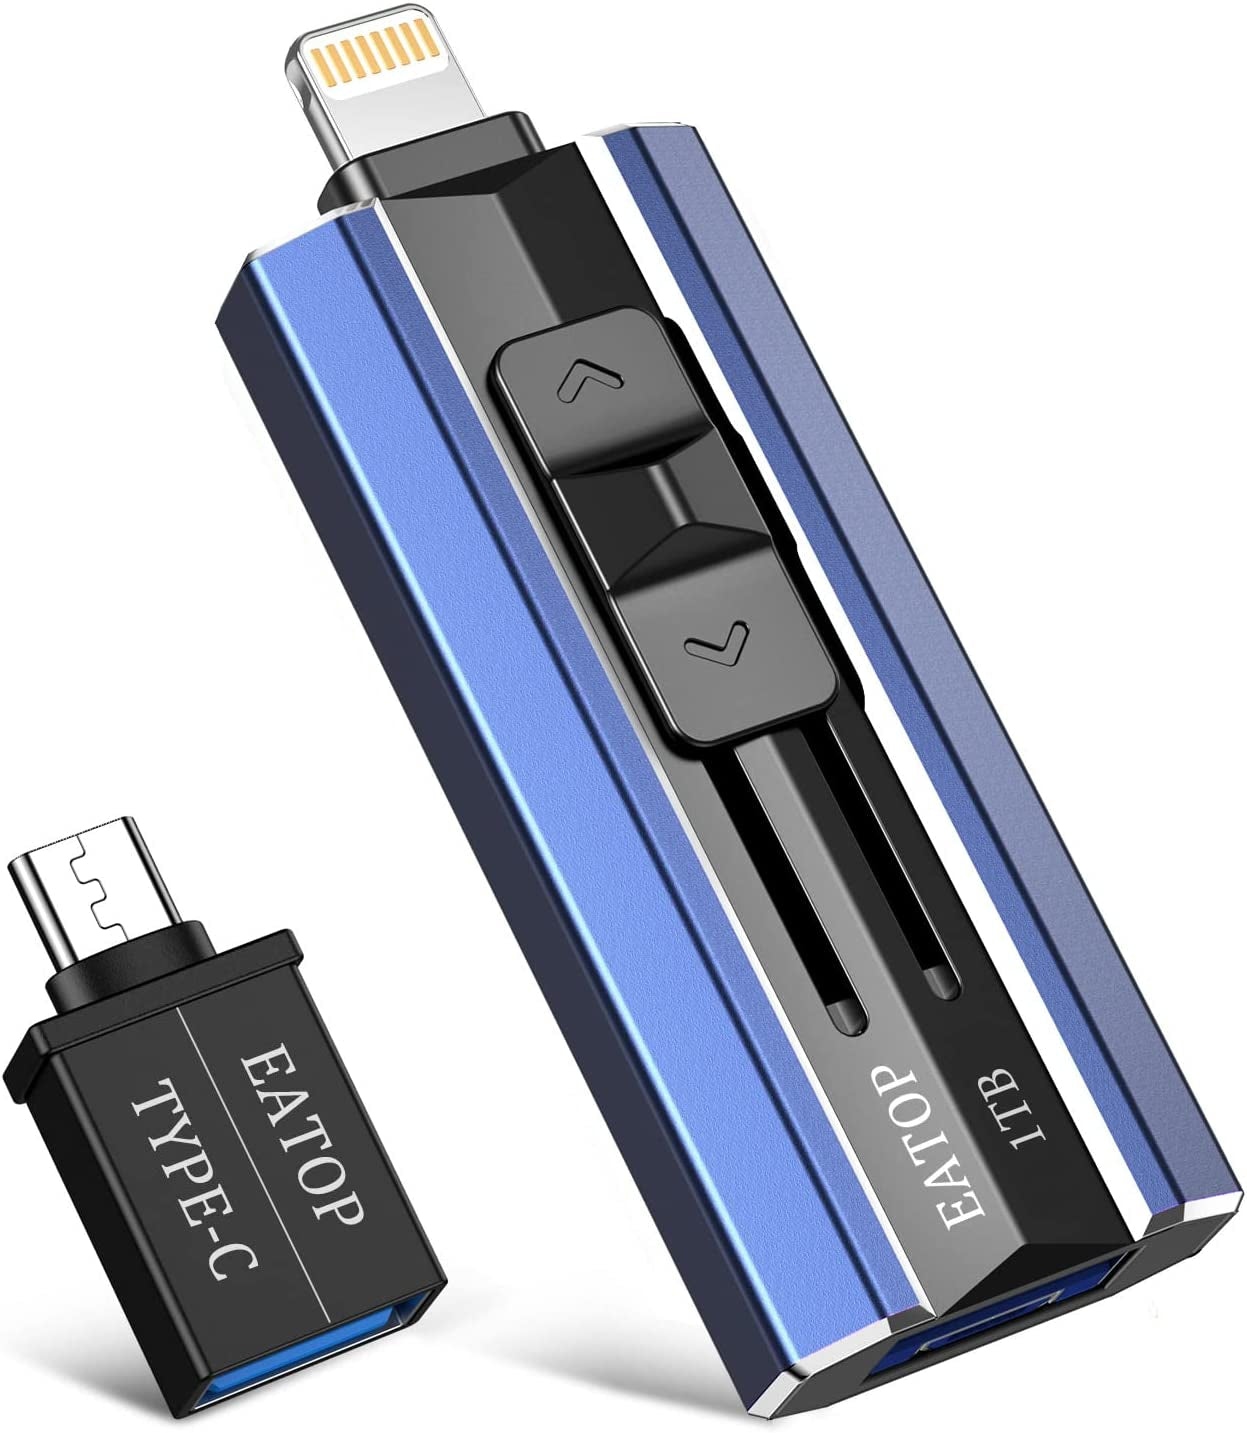 EATOP USB Flash Drive 1TB Iphone Memory Stick Storage for Photos and Videos, Iphone Photo Stick Storage Flash Thumb Drive Compatible with Iphone Ipad Android and Computers (Dark Blue)